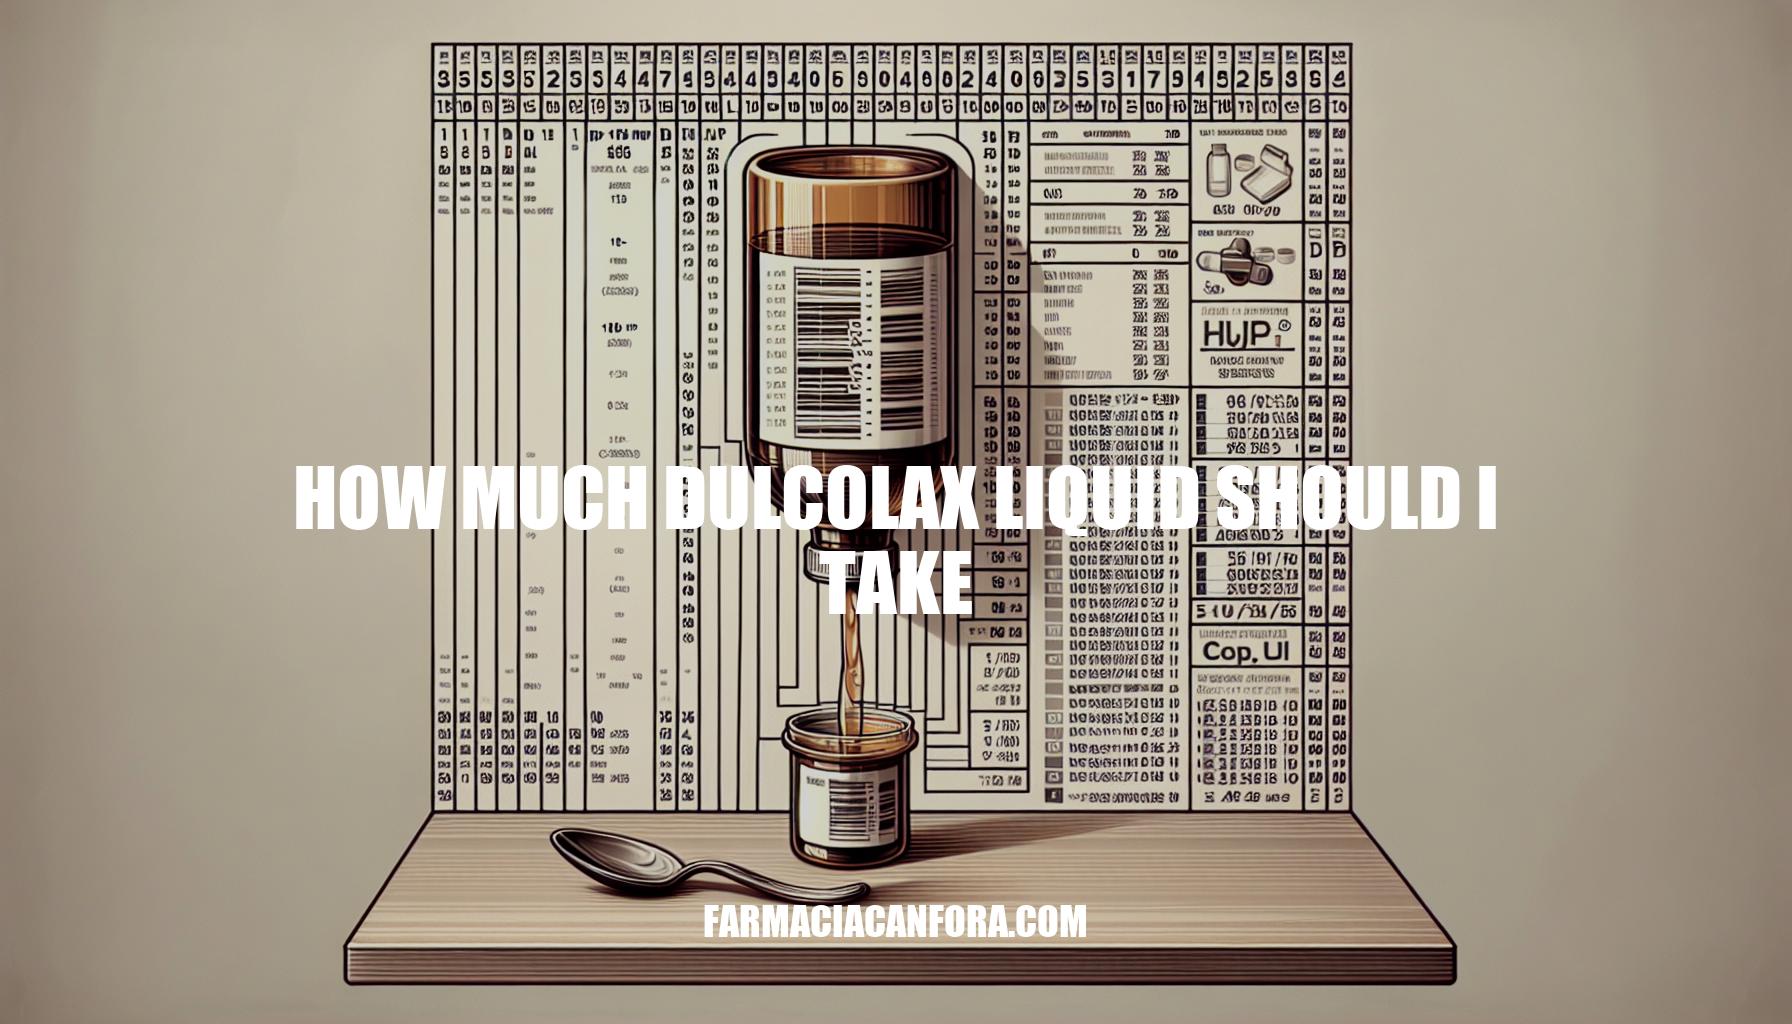 How Much Dulcolax Liquid Should I Take: Dosage Guide